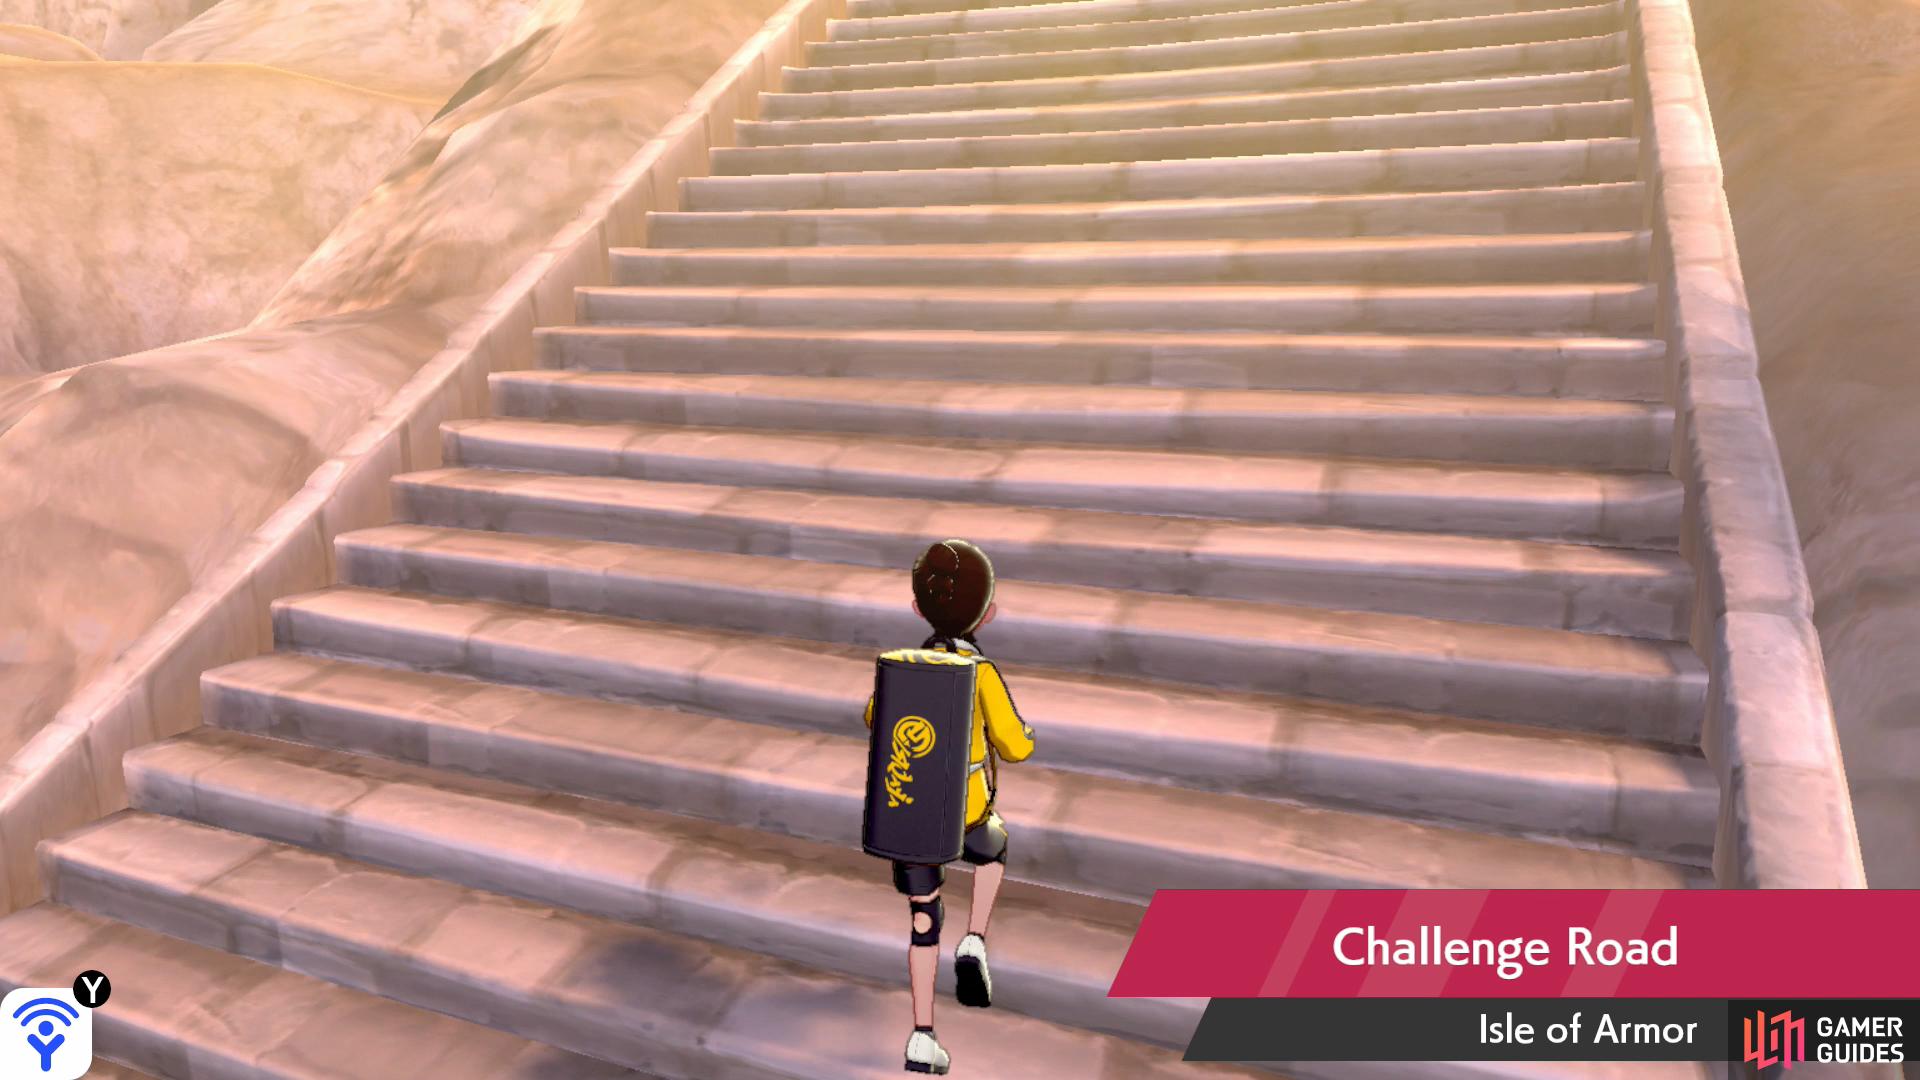 Nothing says "challenge"  than a long flight of stairs.